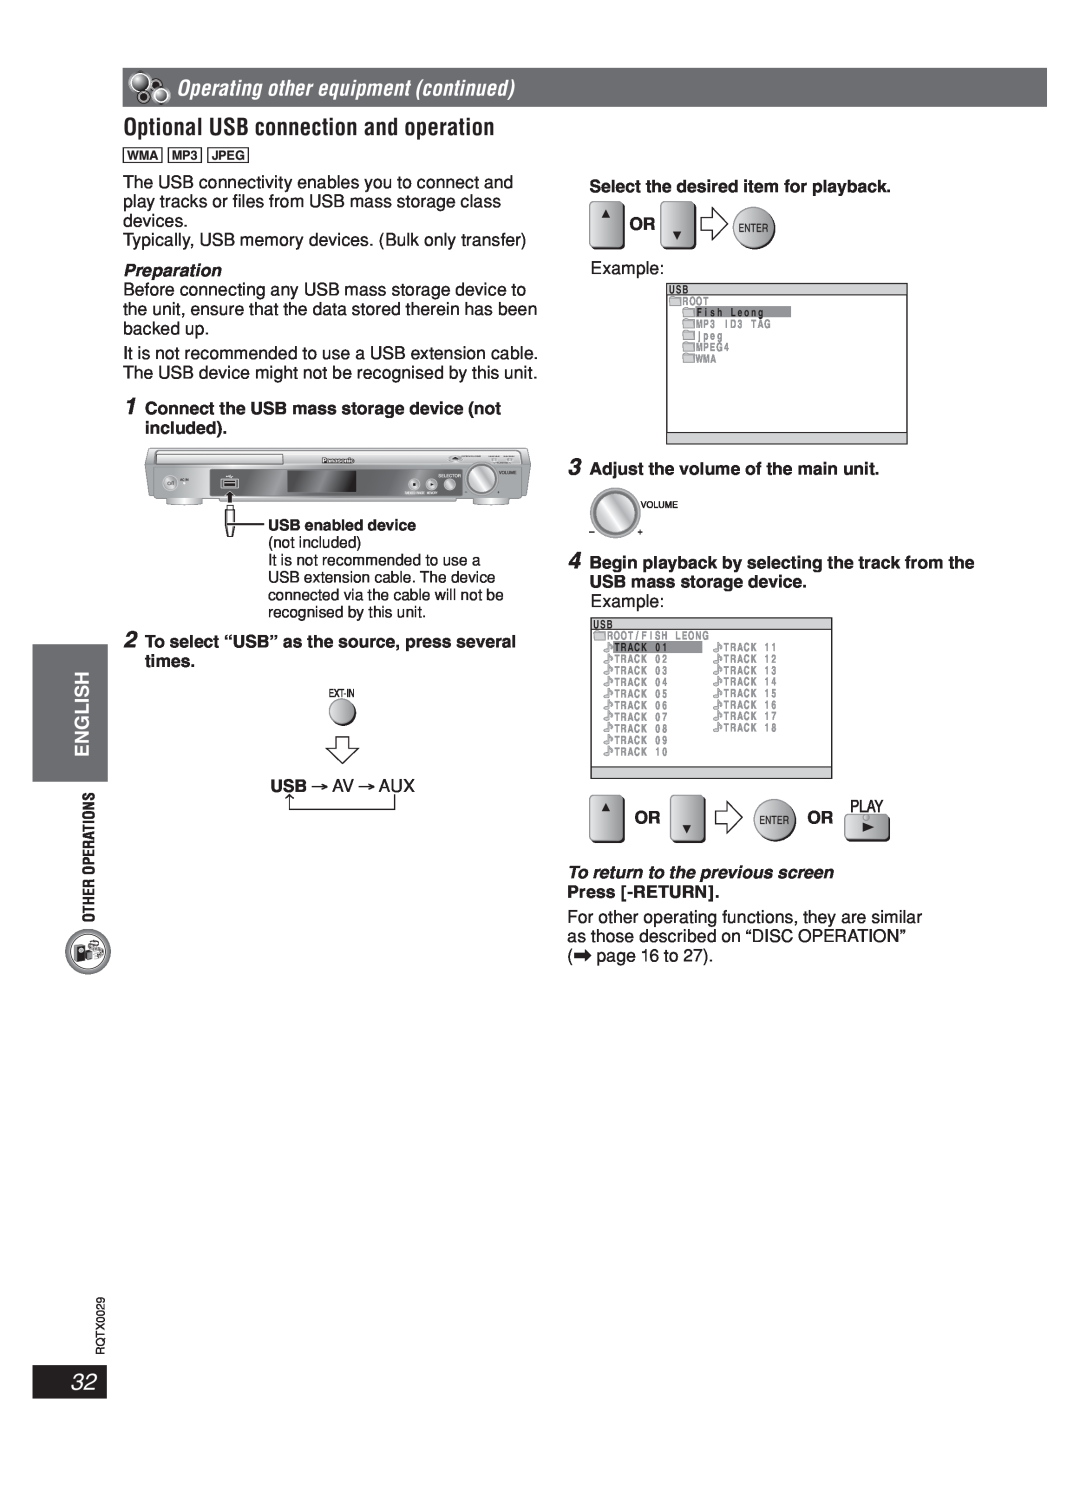 Panasonic sc-pt150 manual Optional USB connection and operation, Operating other equipment continued, Preparation 